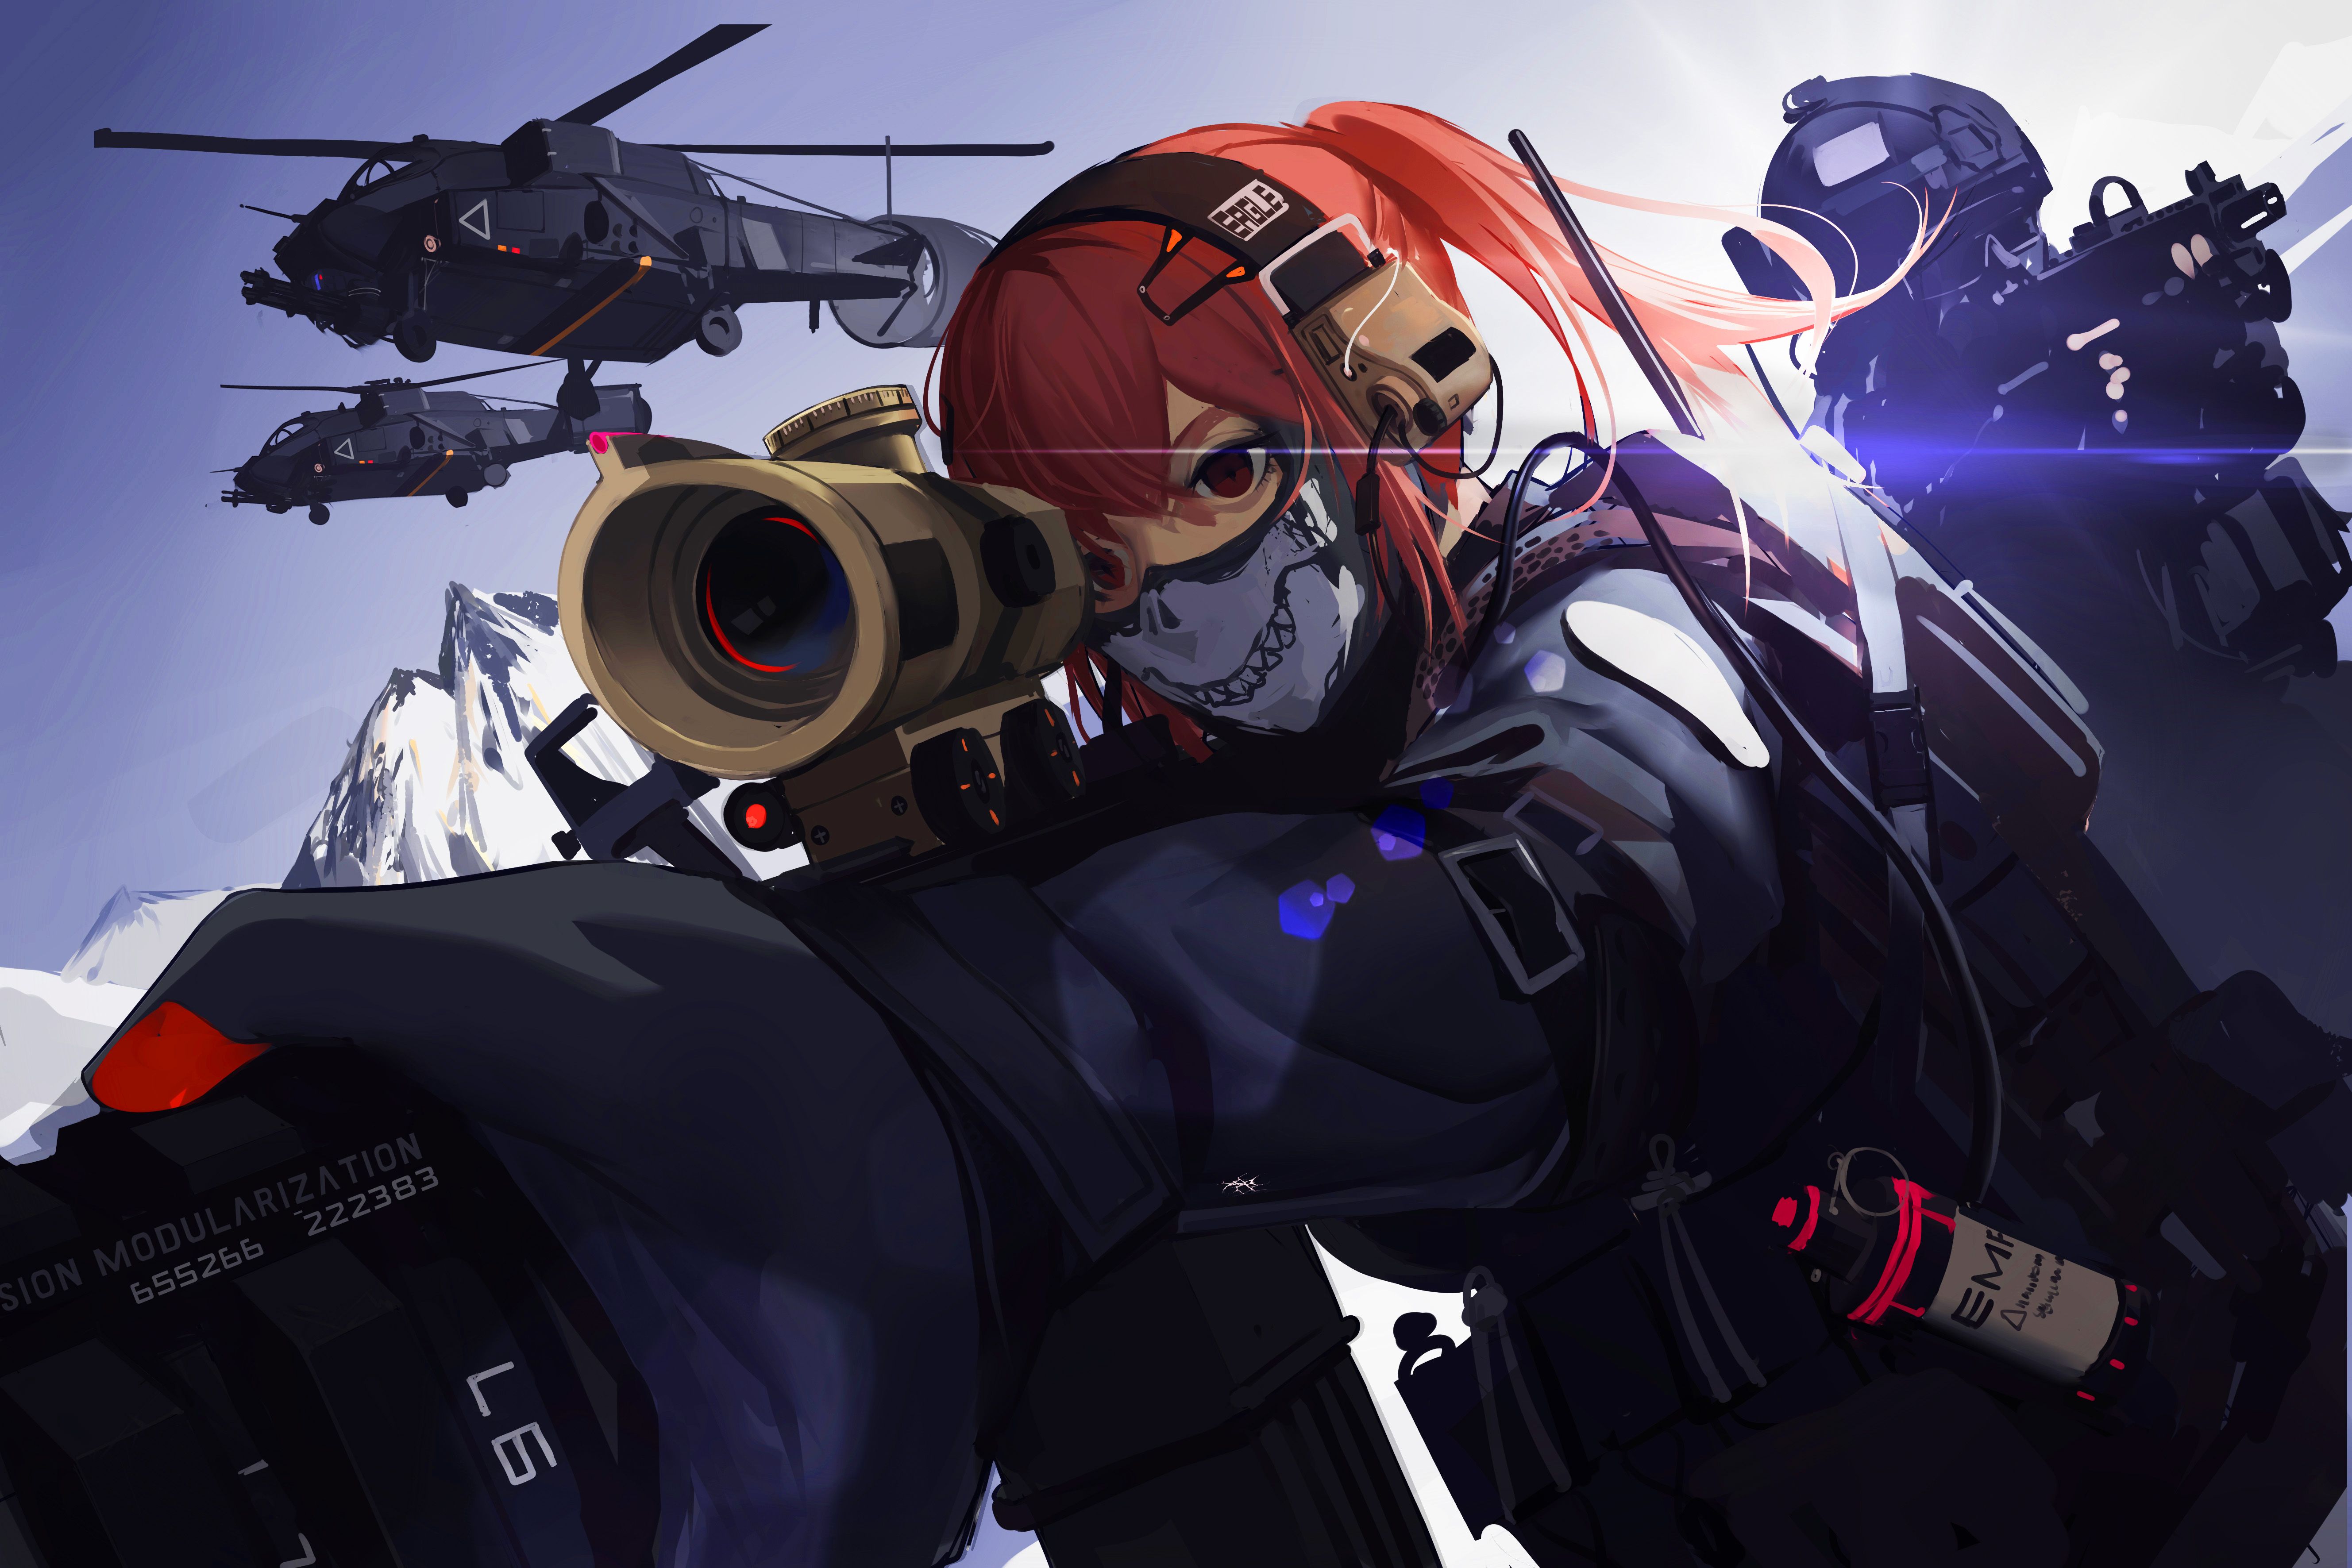 #spec ops, #military, #anime girls, #China, #weapon, #war